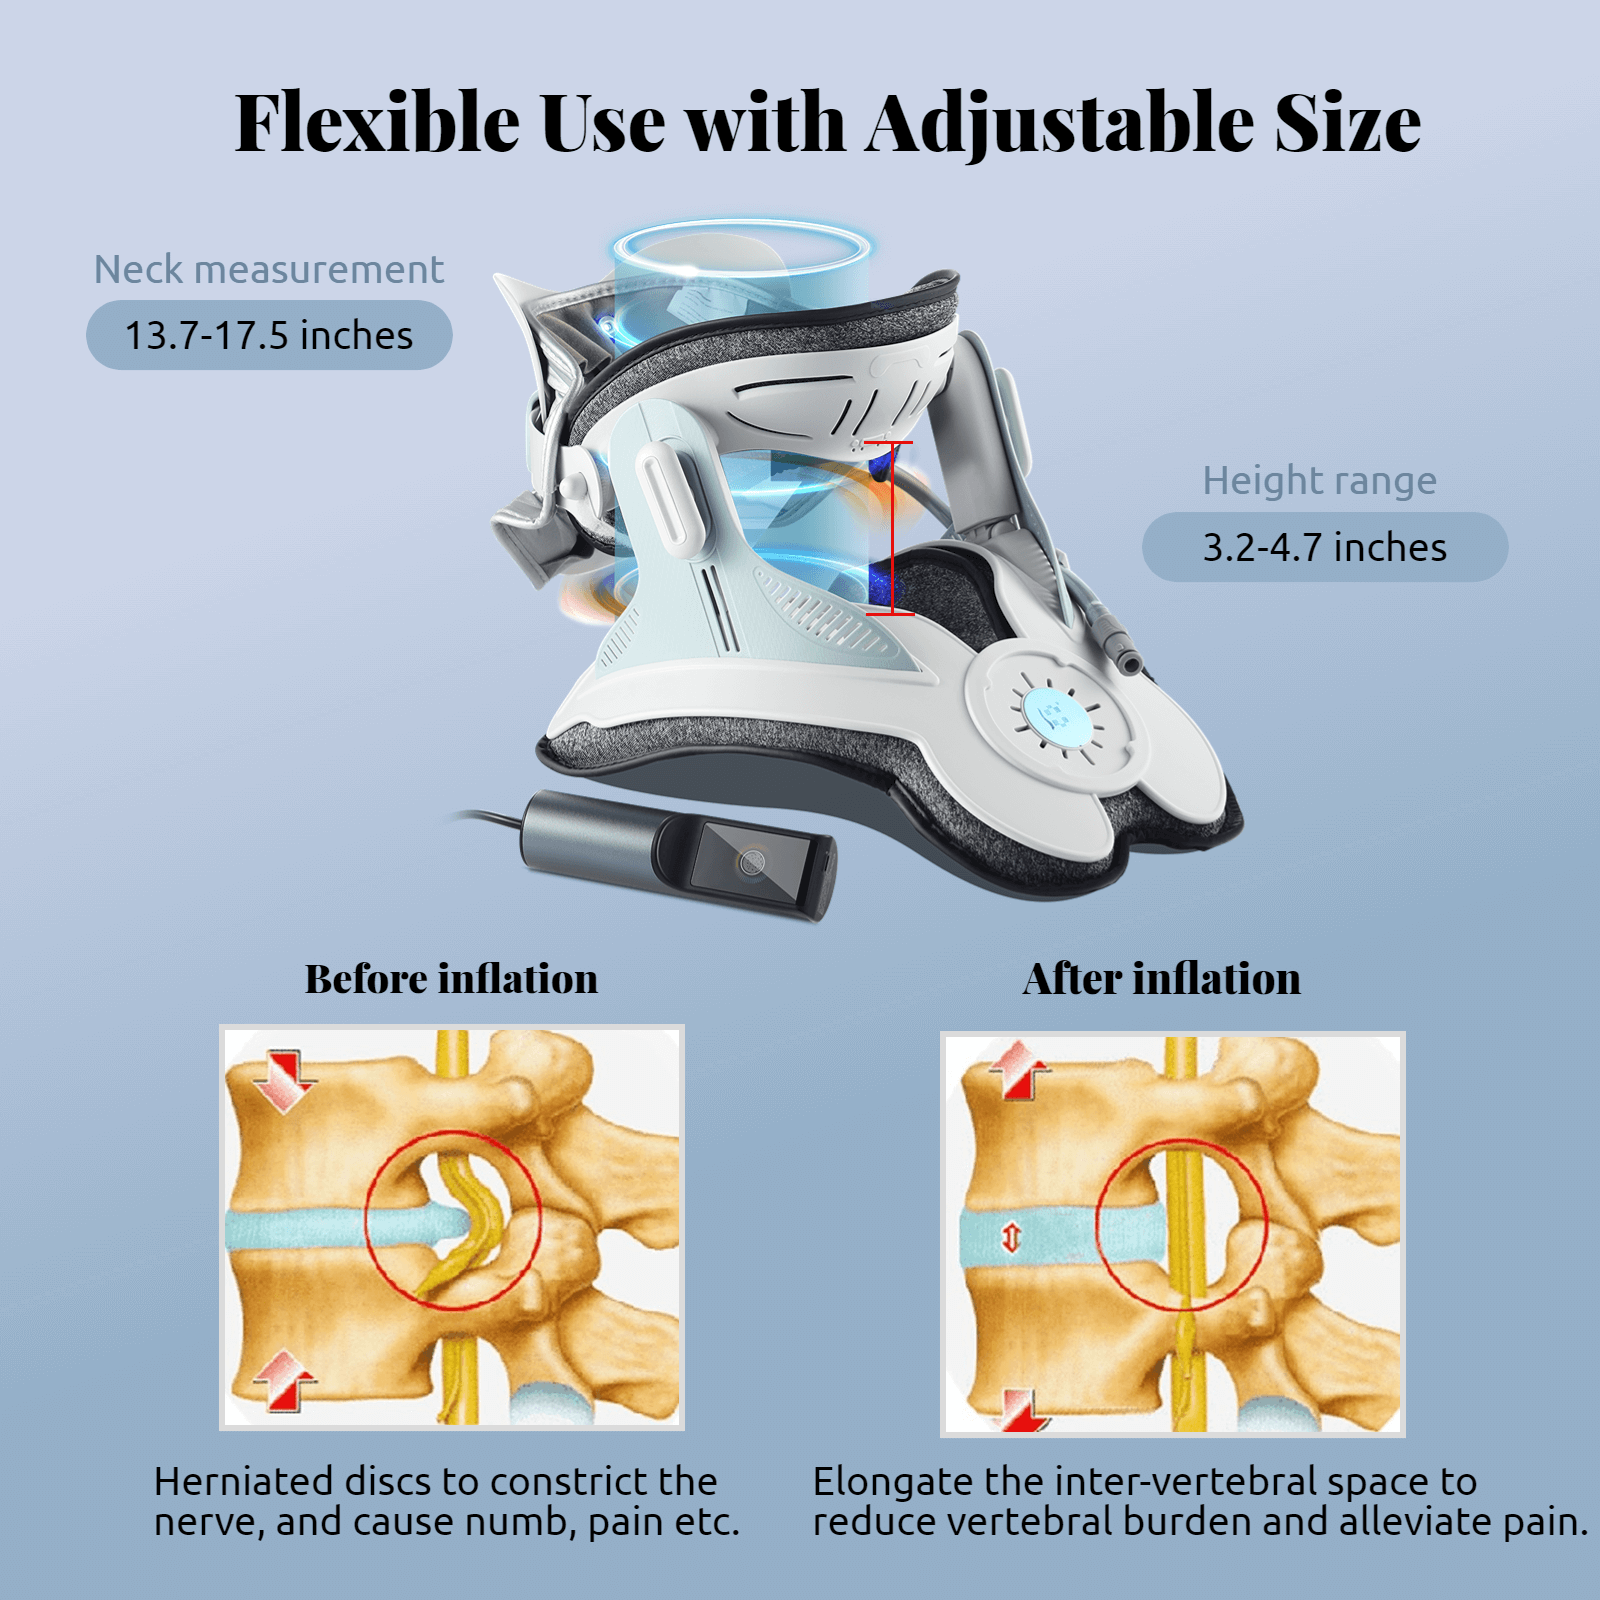 benefit- flexible use with adjustable size